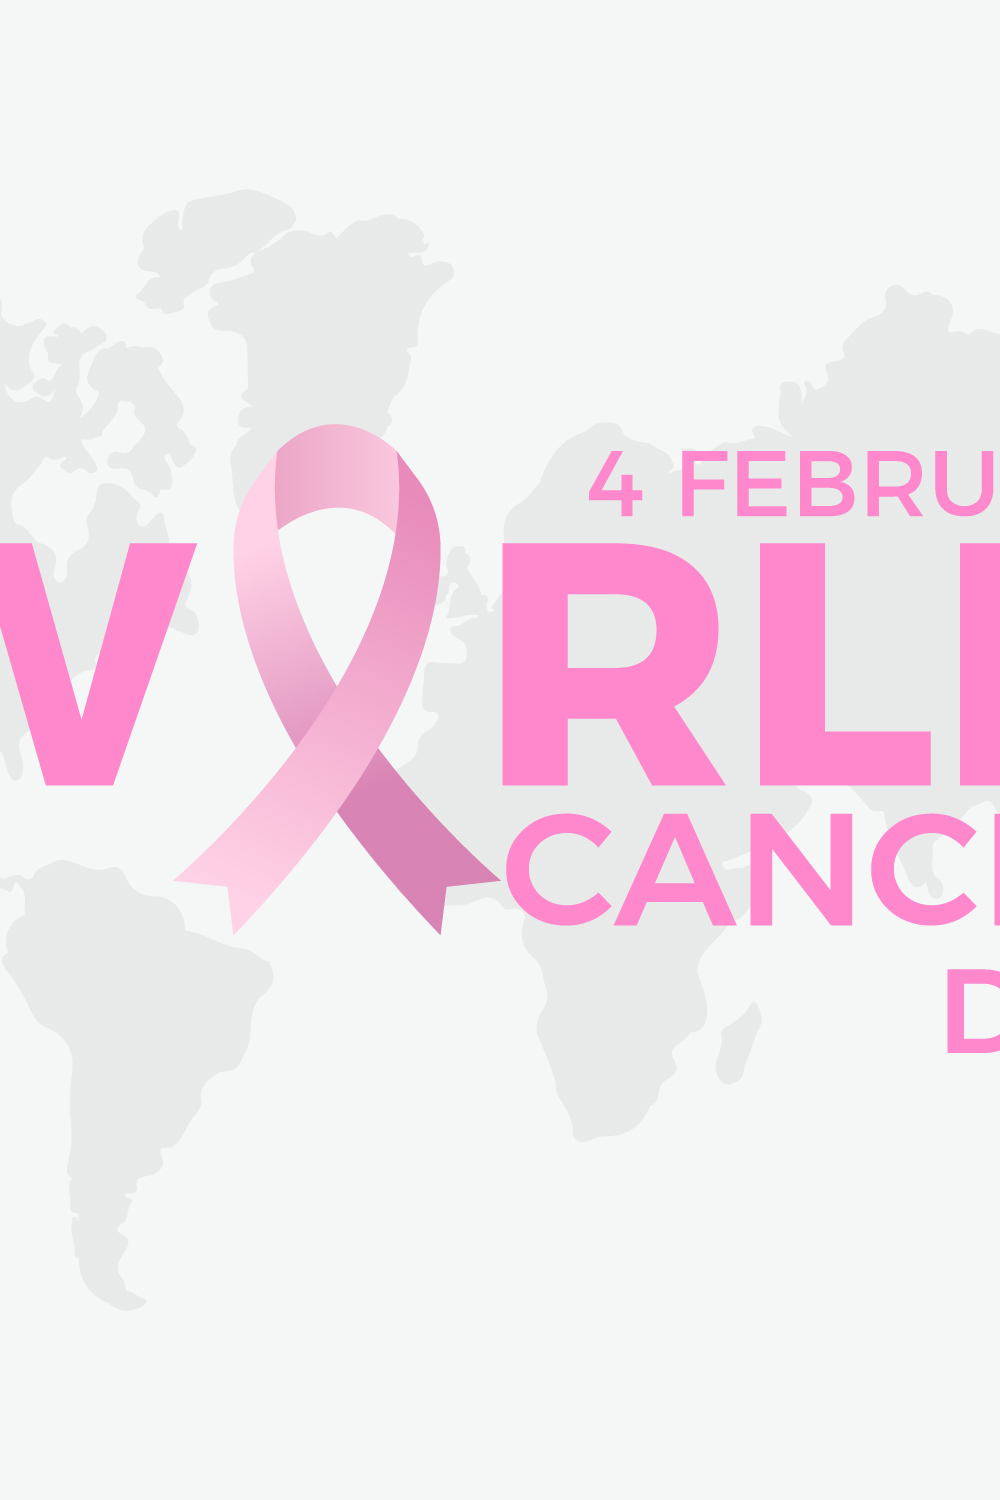 Cancer day pinterest preview image.